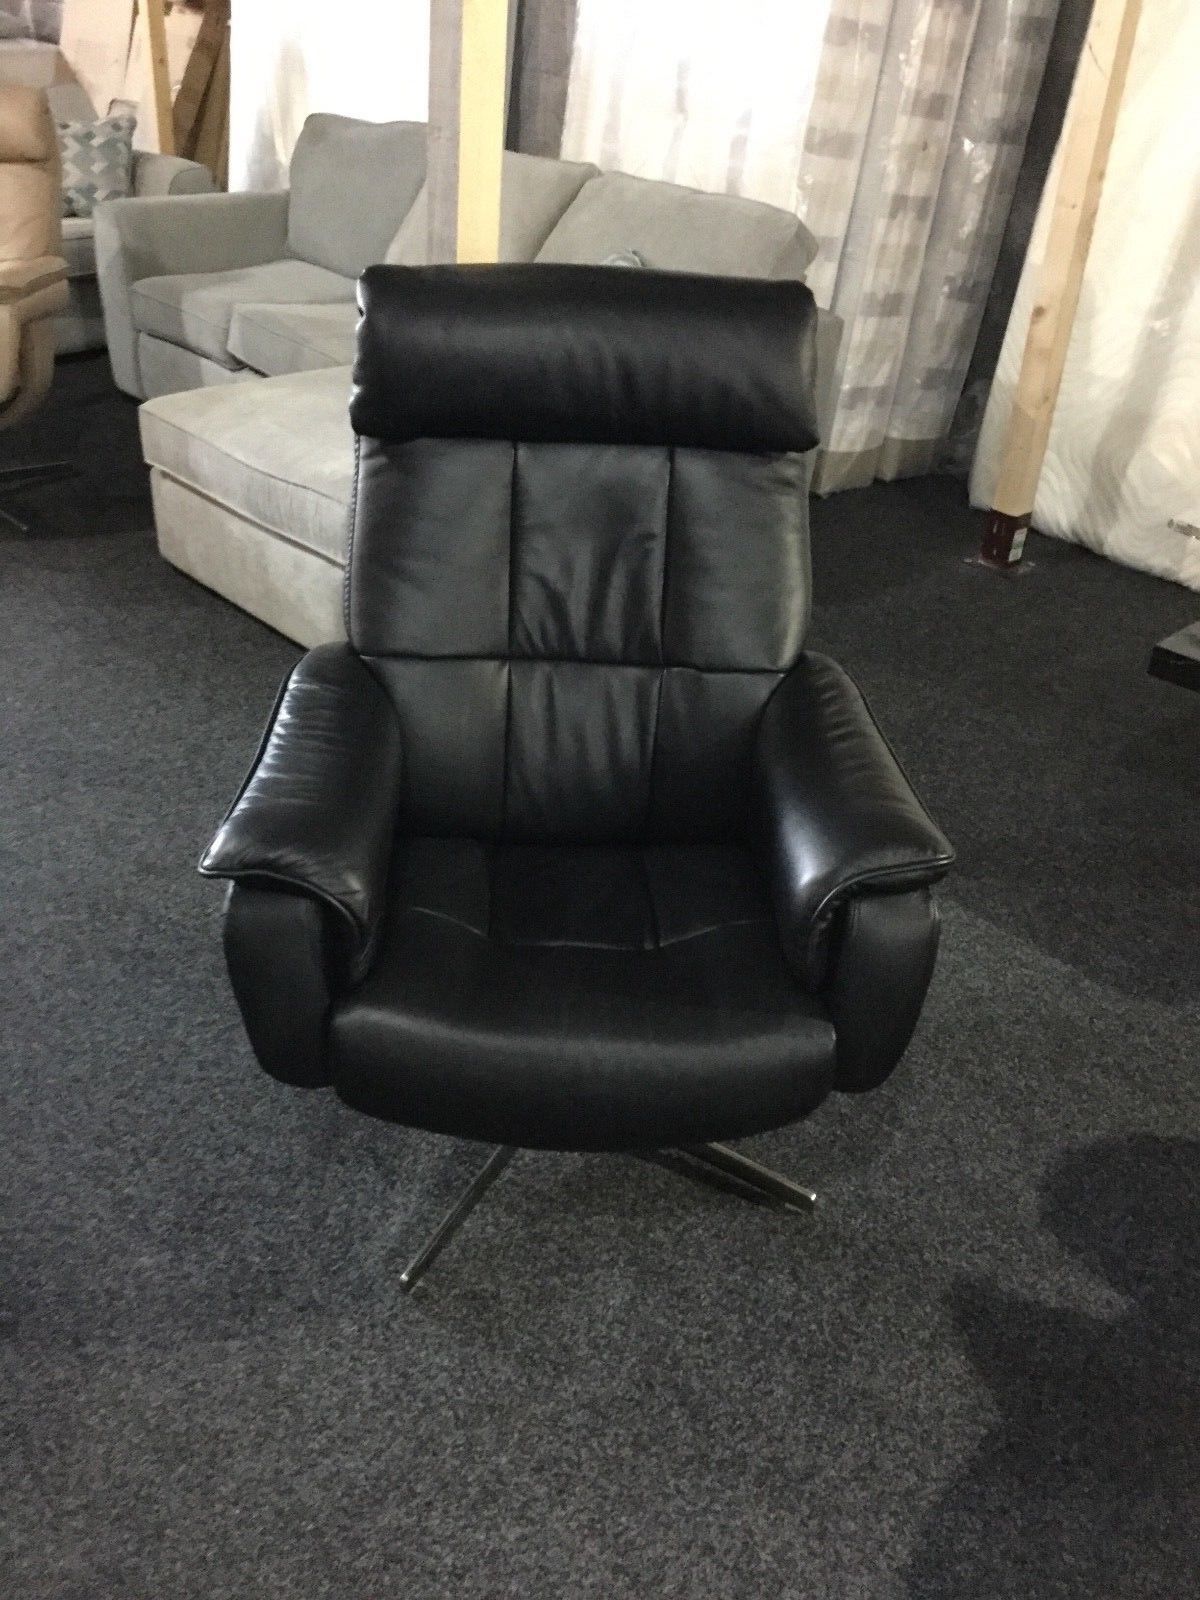 Best And Newest Shades Black Leather Swivel Chair – Affordable Furnishings With Regard To Leather Black Swivel Chairs (View 13 of 20)